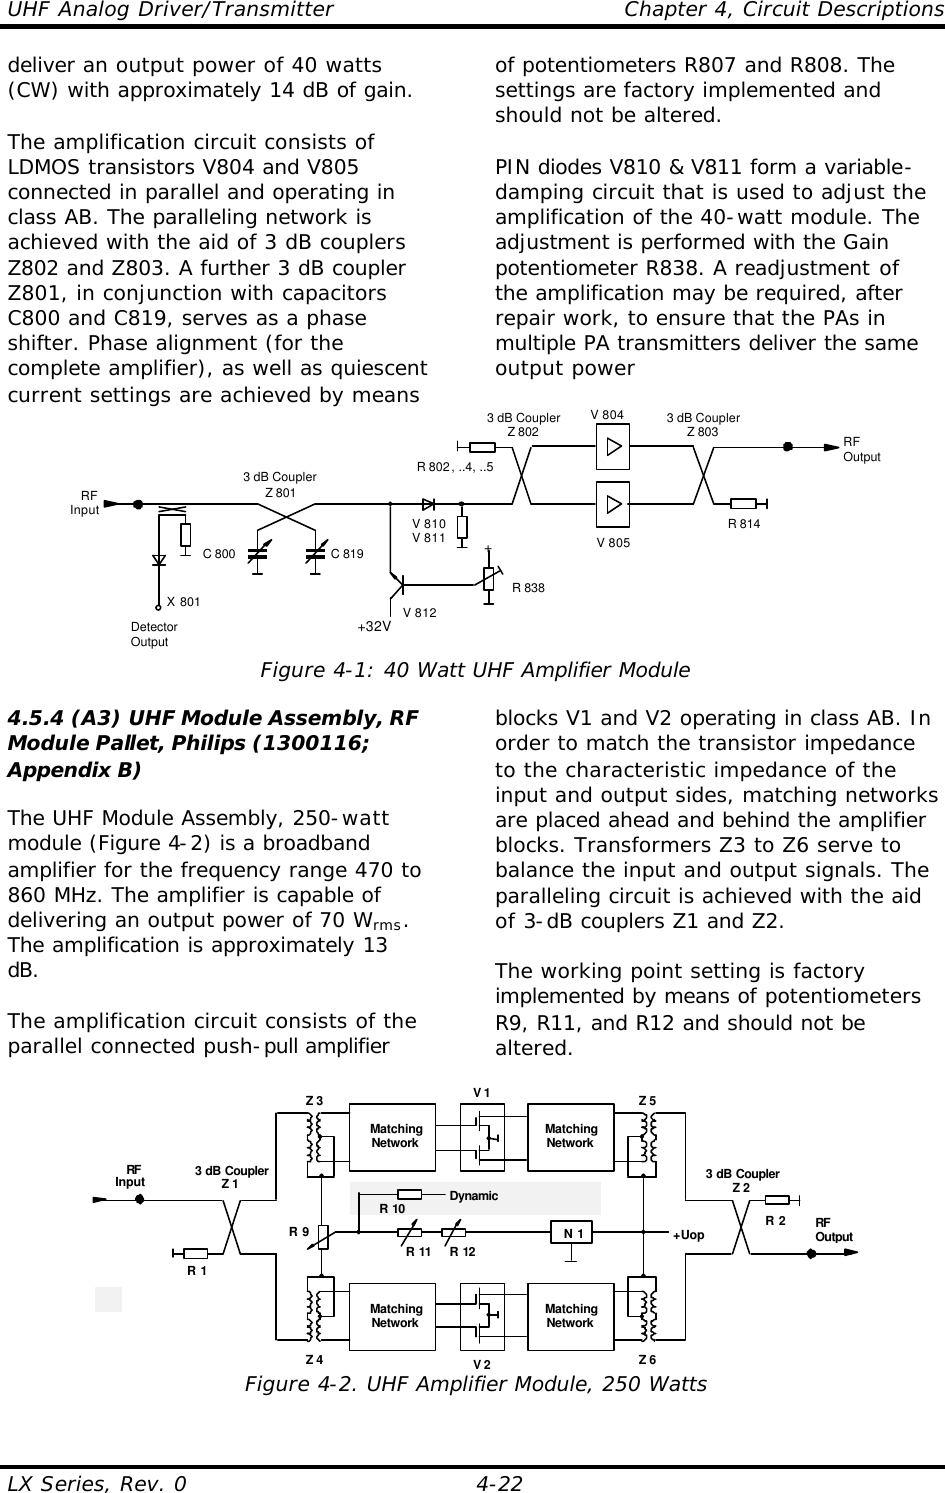 UHF Analog Driver/Transmitter    Chapter 4, Circuit Descriptions LX Series, Rev. 0    4-22 deliver an output power of 40 watts (CW) with approximately 14 dB of gain.  The amplification circuit consists of LDMOS transistors V804 and V805 connected in parallel and operating in class AB. The paralleling network is achieved with the aid of 3 dB couplers Z802 and Z803. A further 3 dB coupler Z801, in conjunction with capacitors C800 and C819, serves as a phase shifter. Phase alignment (for the complete amplifier), as well as quiescent current settings are achieved by means of potentiometers R807 and R808. The settings are factory implemented and should not be altered.  PIN diodes V810 &amp; V811 form a variable-damping circuit that is used to adjust the amplification of the 40-watt module. The adjustment is performed with the Gain potentiometer R838. A readjustment of the amplification may be required, after repair work, to ensure that the PAs in multiple PA transmitters deliver the same output power V 805V 8043 dB CouplerZ 801RFOutputRFInput R 814R 802, ..4, ..5C 800 C 819DetectorOutputX 801+32V+R 838V 810V 811V 8123 dB CouplerZ 802 3 dB CouplerZ 803 Figure 4-1: 40 Watt UHF Amplifier Module  4.5.4 (A3) UHF Module Assembly, RF Module Pallet, Philips (1300116; Appendix B)  The UHF Module Assembly, 250-watt module (Figure 4-2) is a broadband amplifier for the frequency range 470 to 860 MHz. The amplifier is capable of delivering an output power of 70 Wrms. The amplification is approximately 13 dB.  The amplification circuit consists of the parallel connected push-pull amplifier   blocks V1 and V2 operating in class AB. In order to match the transistor impedance to the characteristic impedance of the input and output sides, matching networks are placed ahead and behind the amplifier blocks. Transformers Z3 to Z6 serve to balance the input and output signals. The paralleling circuit is achieved with the aid of 3-dB couplers Z1 and Z2.  The working point setting is factory implemented by means of potentiometers R9, R11, and R12 and should not be altered.  V 13 dB CouplerZ 2RFOutputRFInput 3 dB CouplerZ 1R 2R 1MatchingNetworkMatchingNetworkV 2MatchingNetworkMatchingNetworkZ 3 Z 5Z 4 Z 6+UopN 1R 11 R 12R 9R 10 DynamicEqualization Figure 4-2. UHF Amplifier Module, 250 Watts 